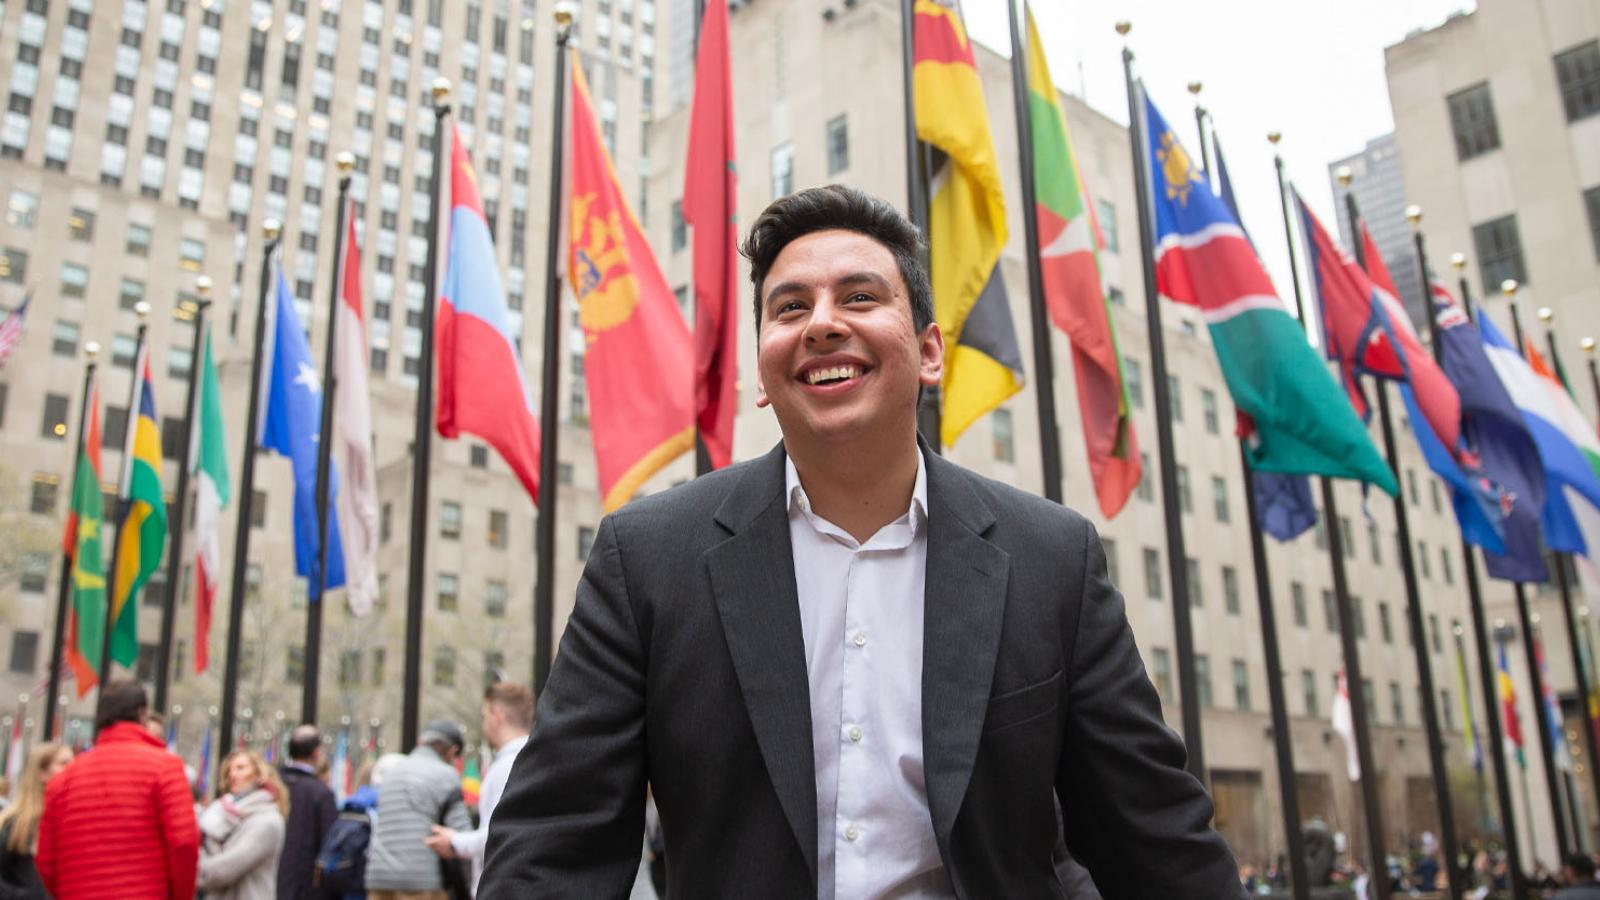 Young man standing in front of a row of world flags in New York City